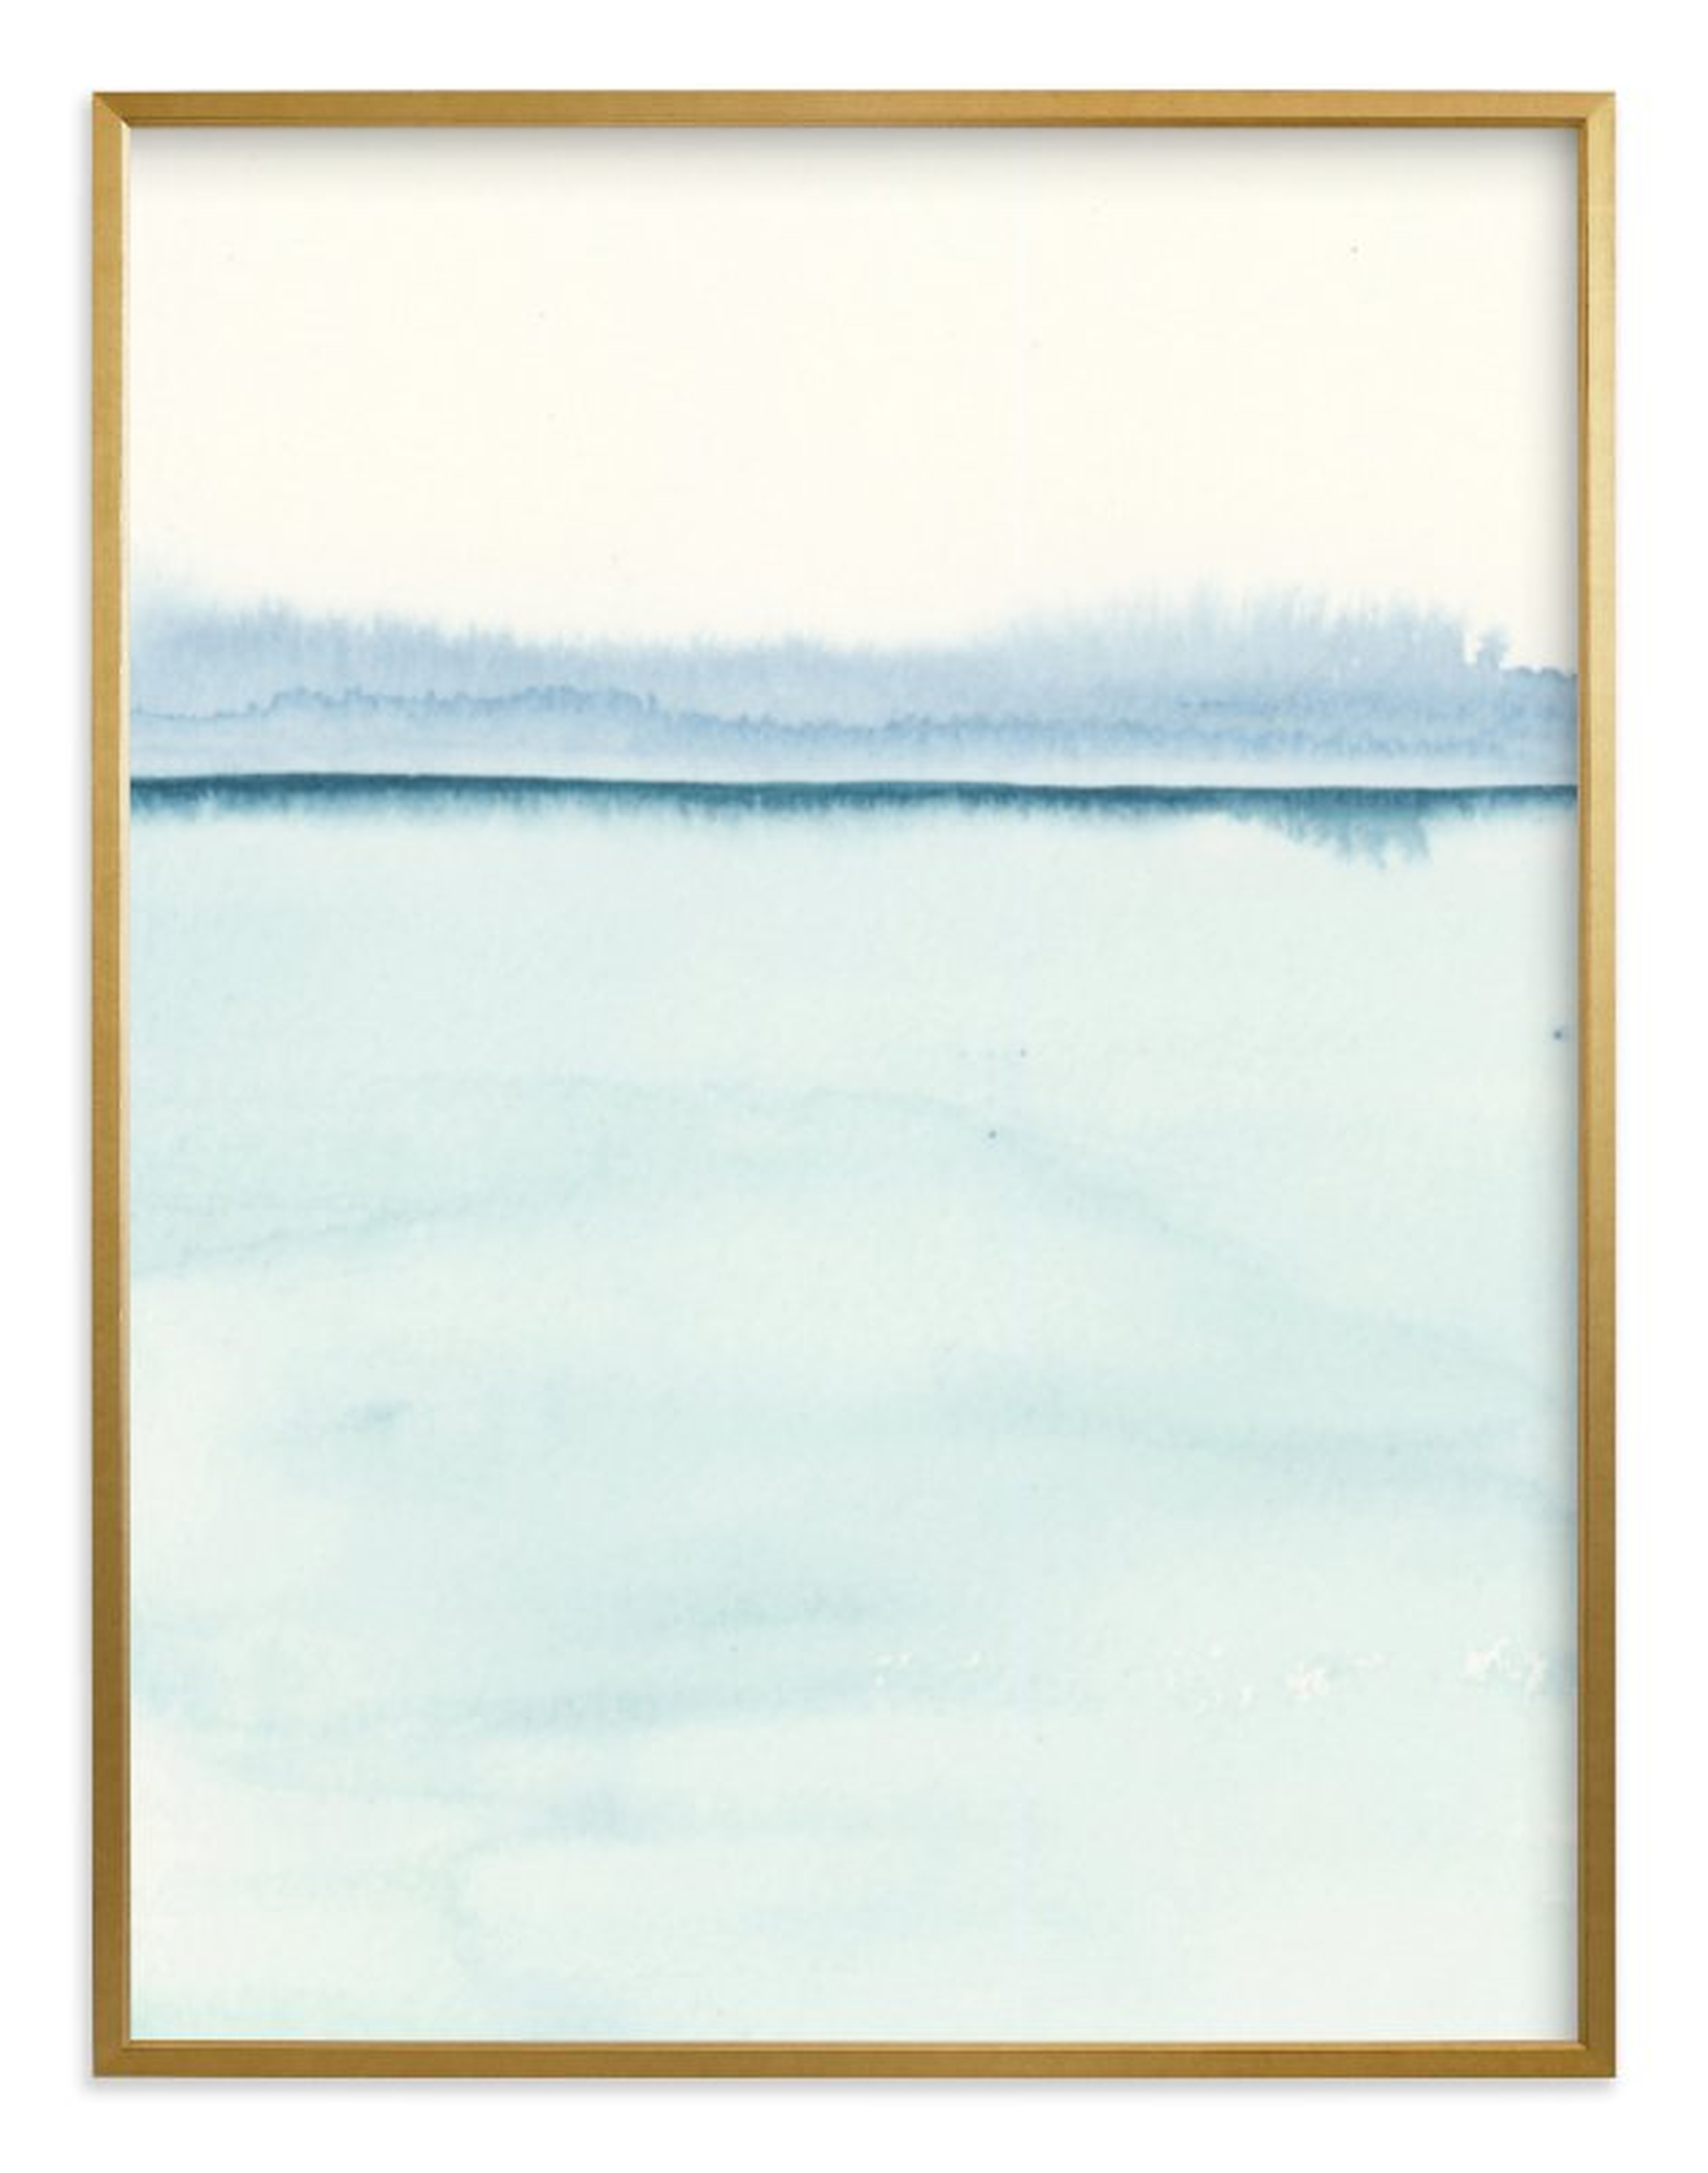 Playa Two - 40 x 54" gilded frame - Minted